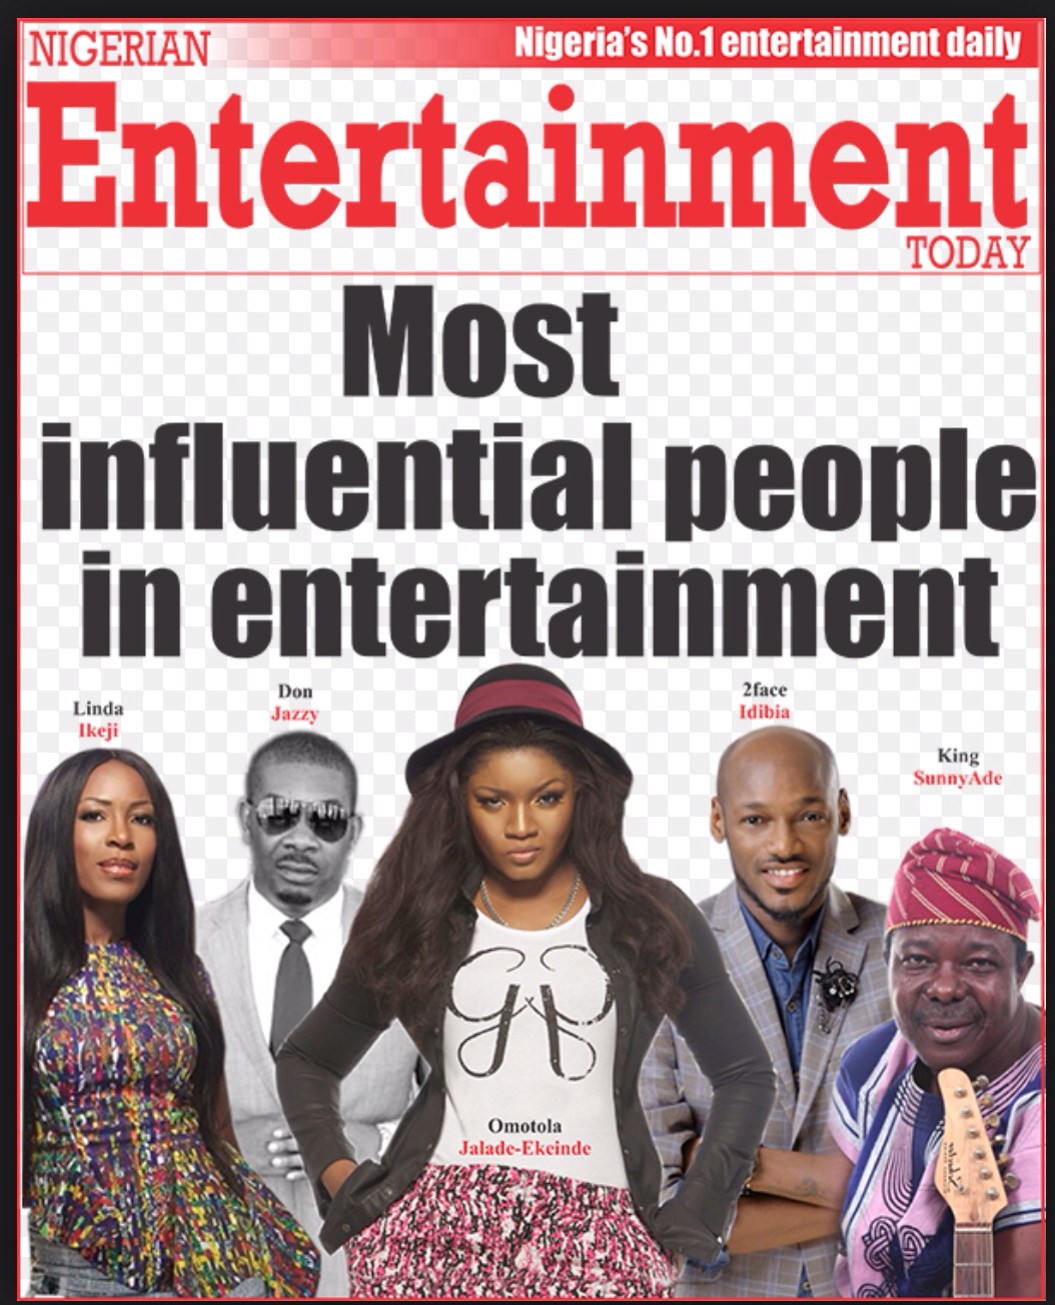 Omotola leads the list of most influential people in entertainment .